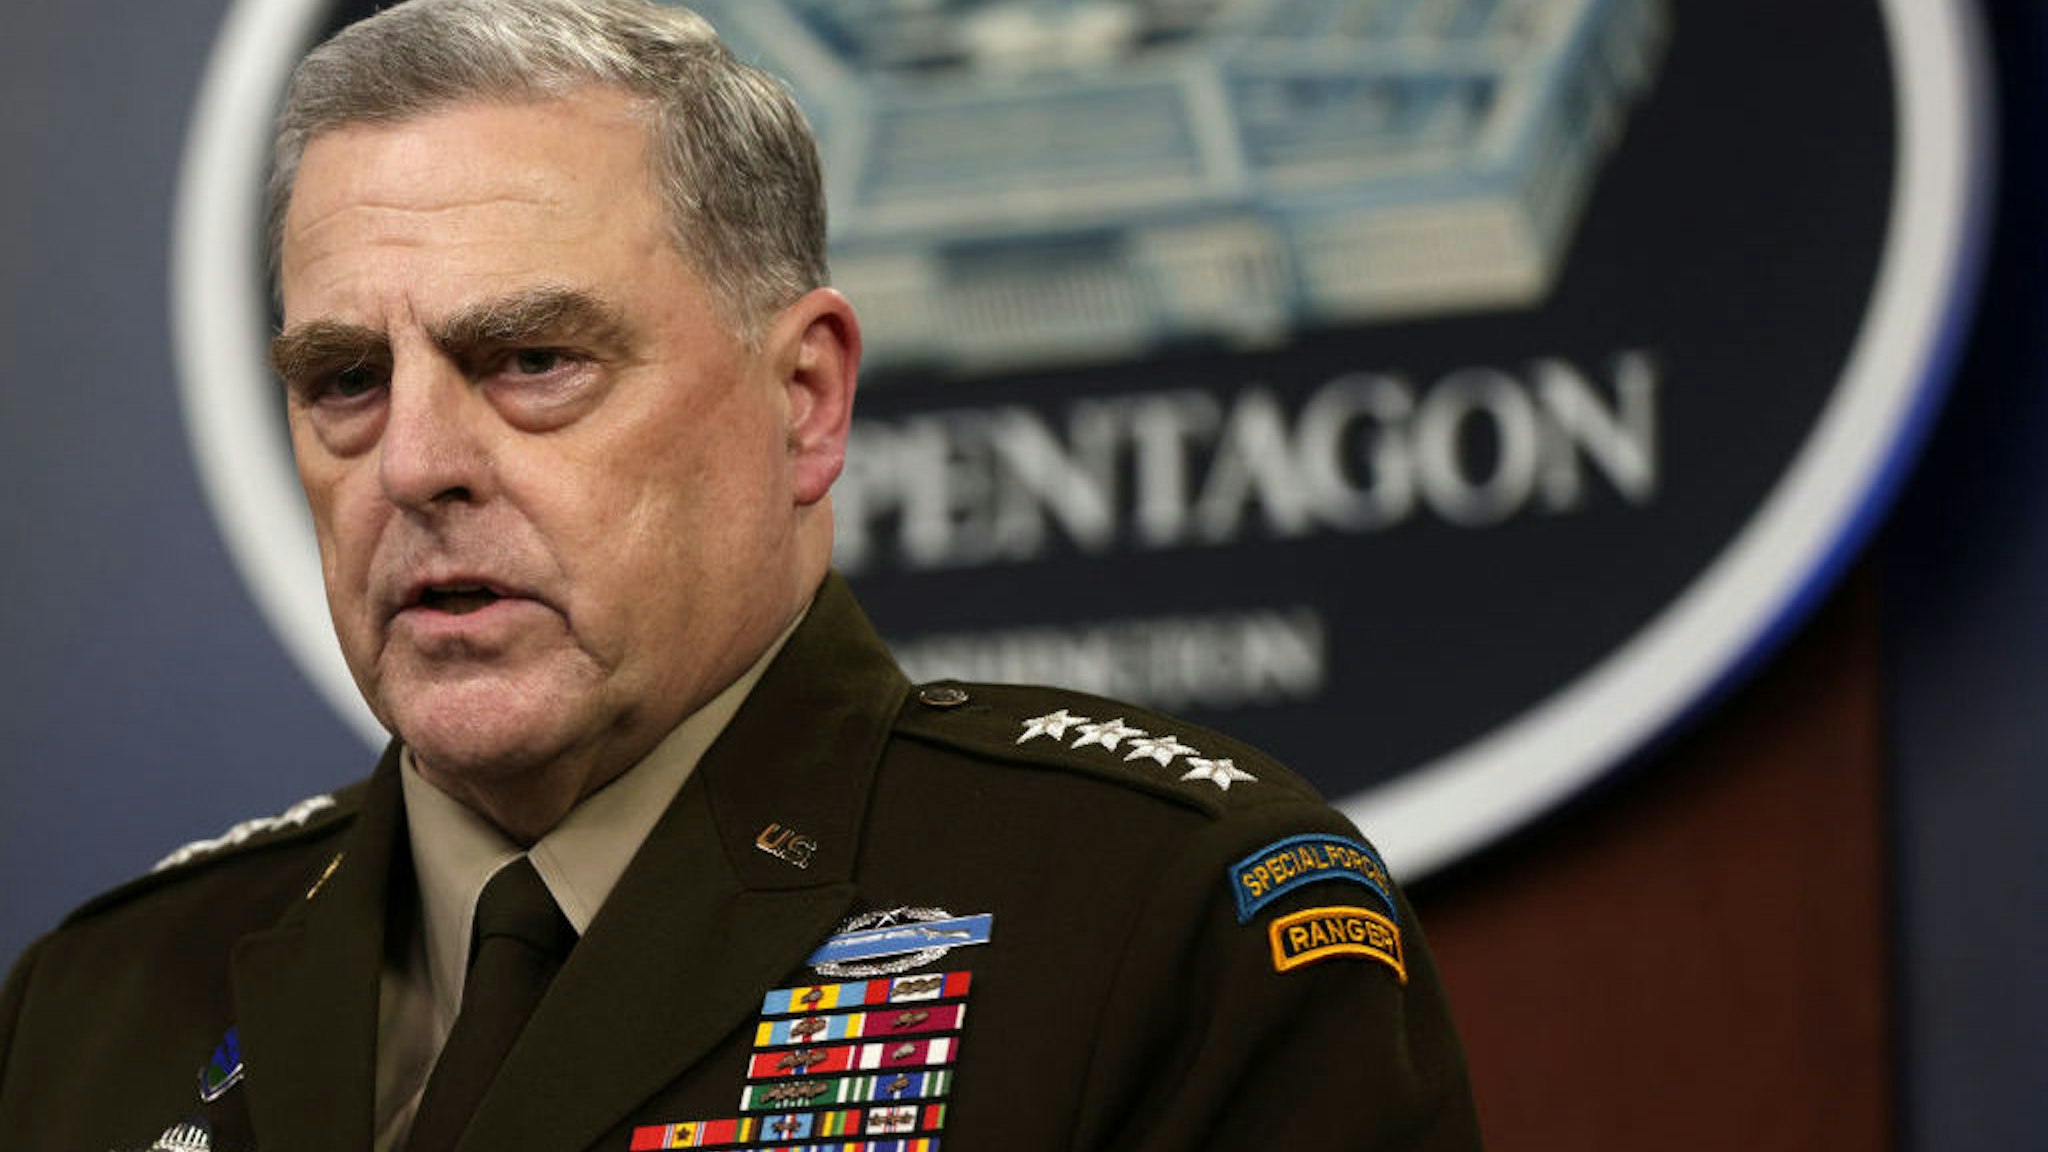 ARLINGTON, VIRGINIA - AUGUST 18: Chairman of the Joint Chiefs of Staff Army General Mark Milley participates in a news briefing at the Pentagon August 18, 2021 in Arlington, Virginia. U.S. Secretary of Defense Lloyd Austin and General Milley held a news briefing to discuss the current situation in Afghanistan after the Taliban took control of the country. (Photo by Alex Wong/Getty Images)